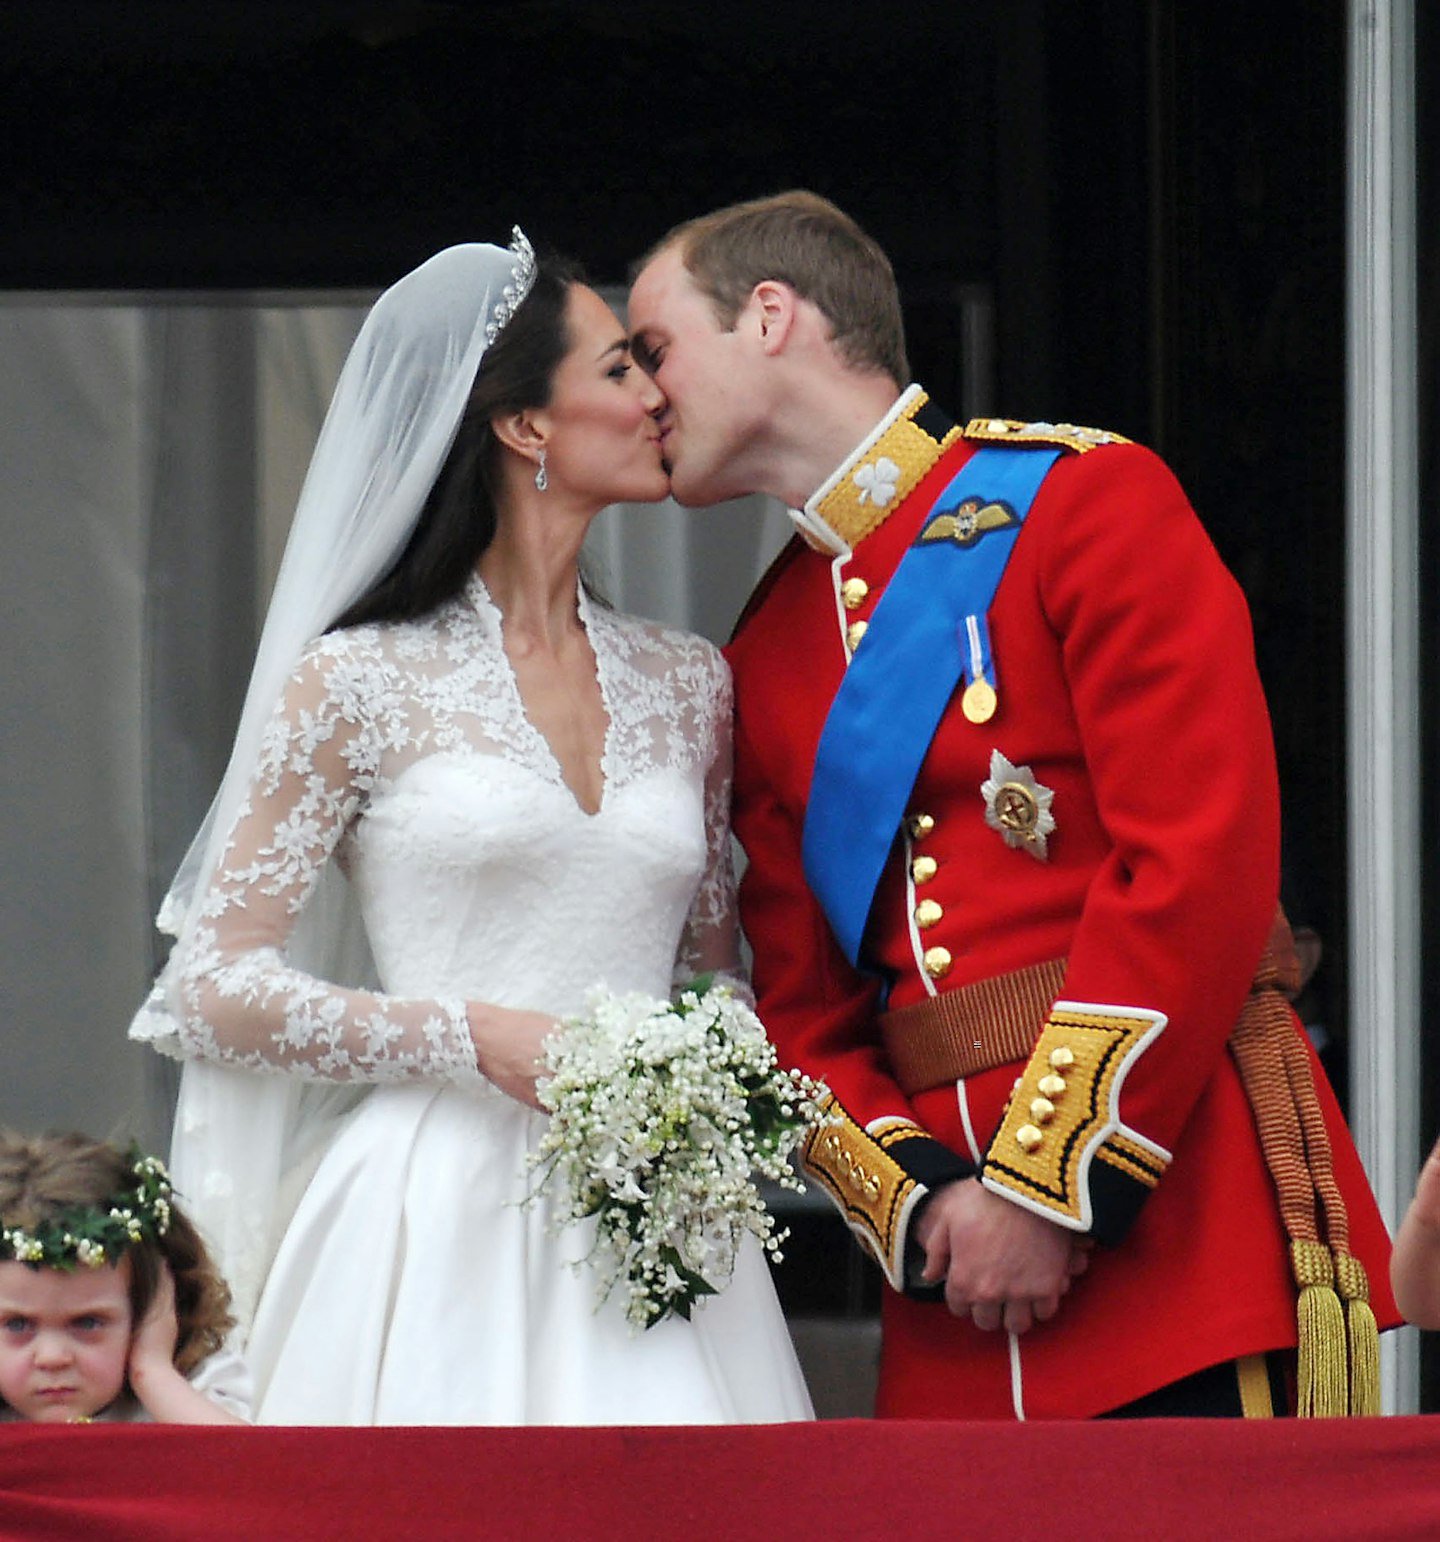 A History Of Royal Snogs